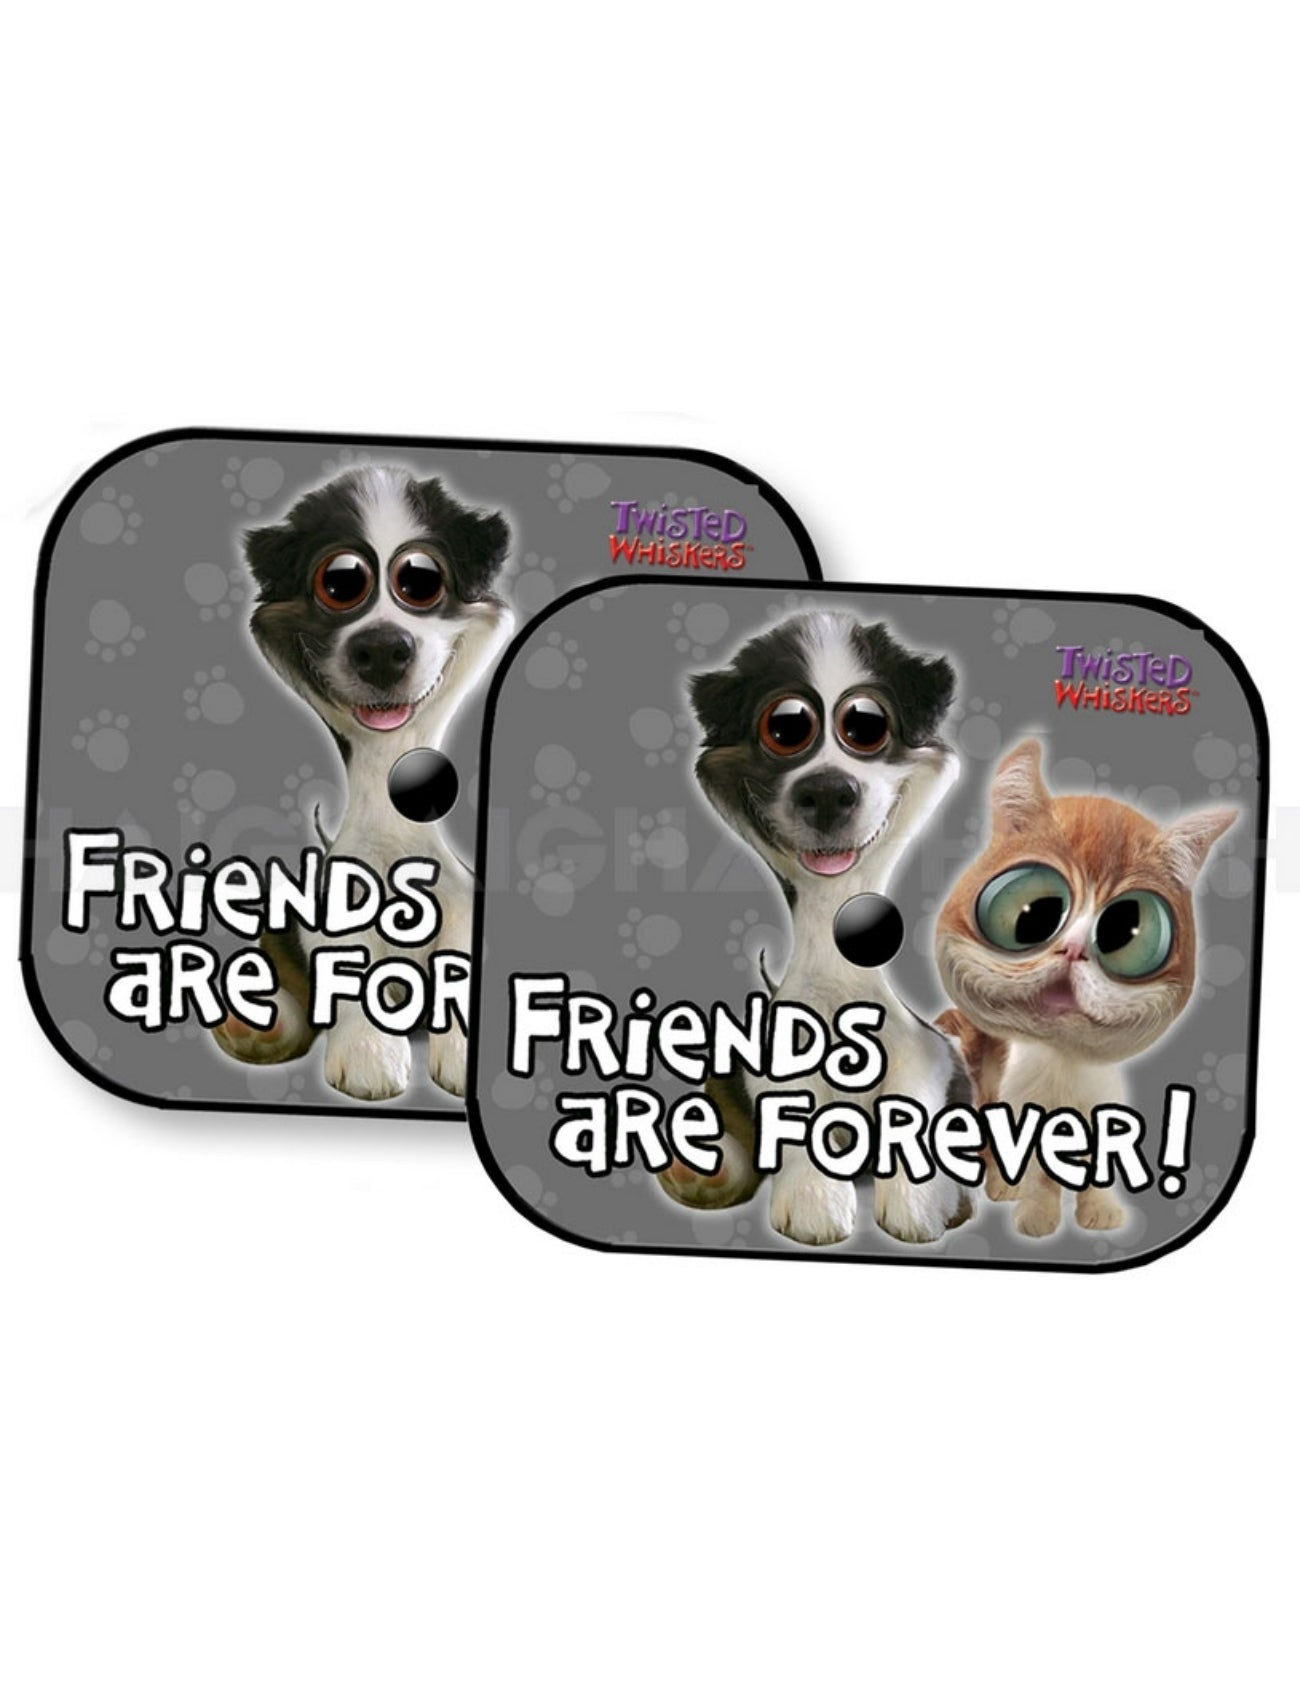 SIDE SHADE "FRIENDS4EVER"